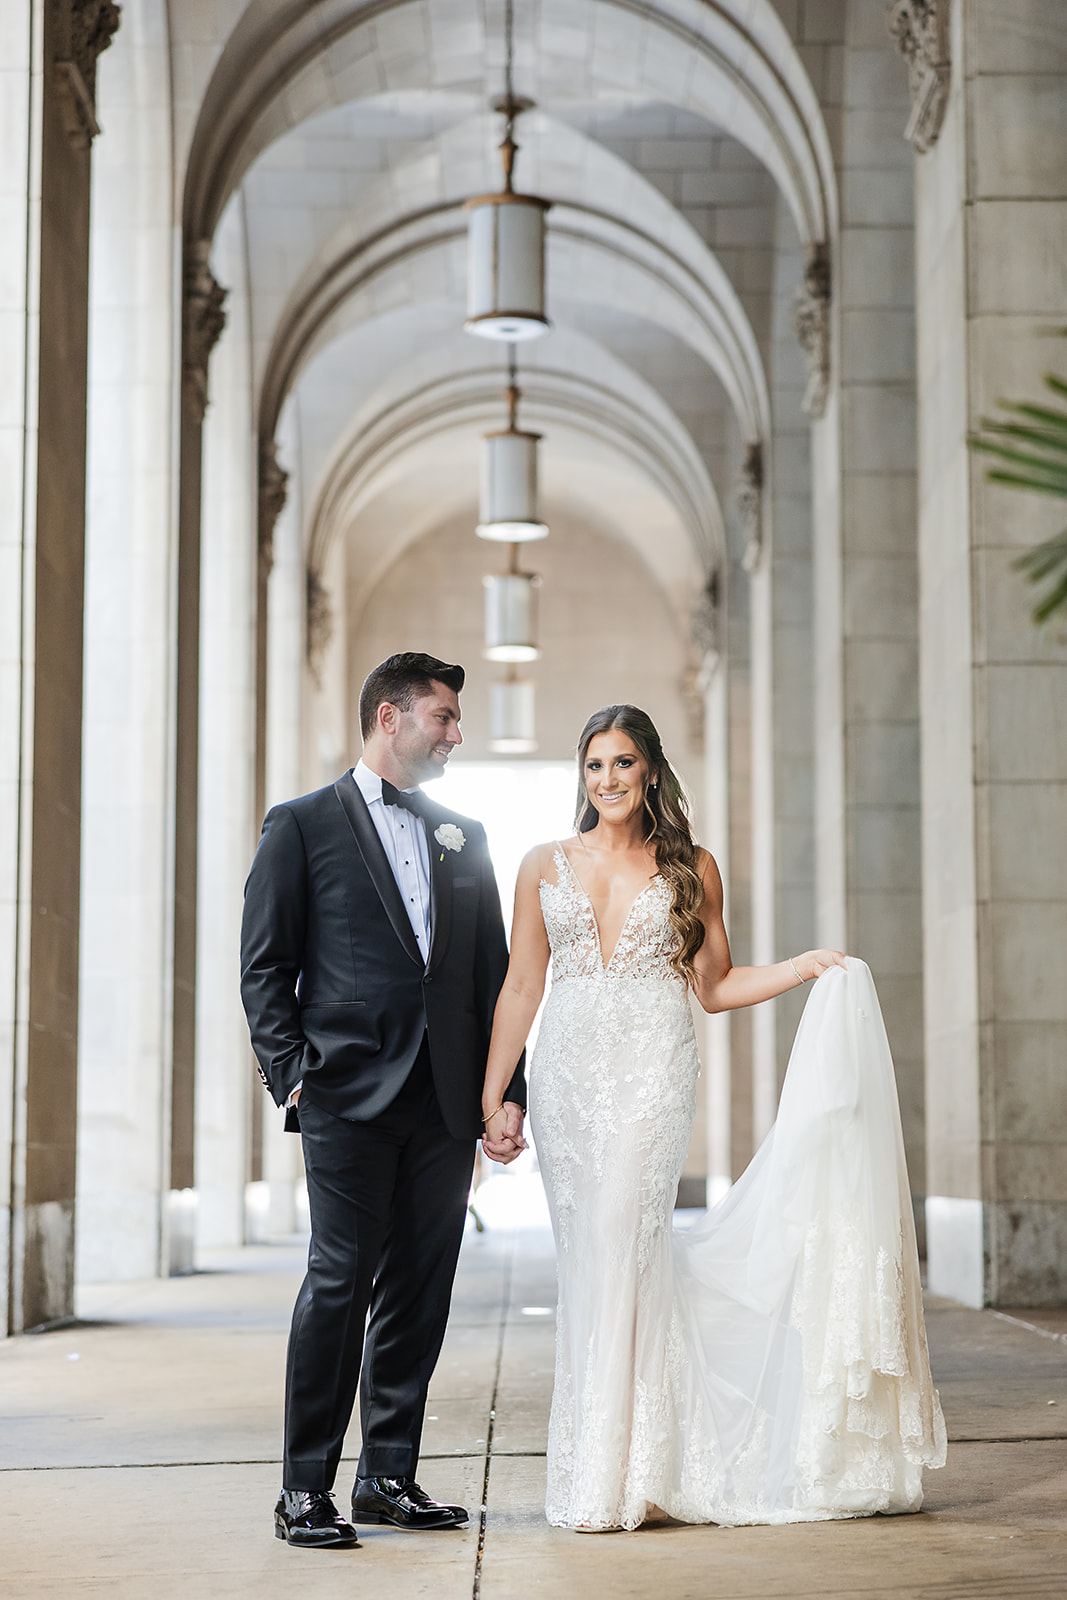 Stunning wedding portrait of the bride and groom at the Notary Hotel archway in center city Philadelphia